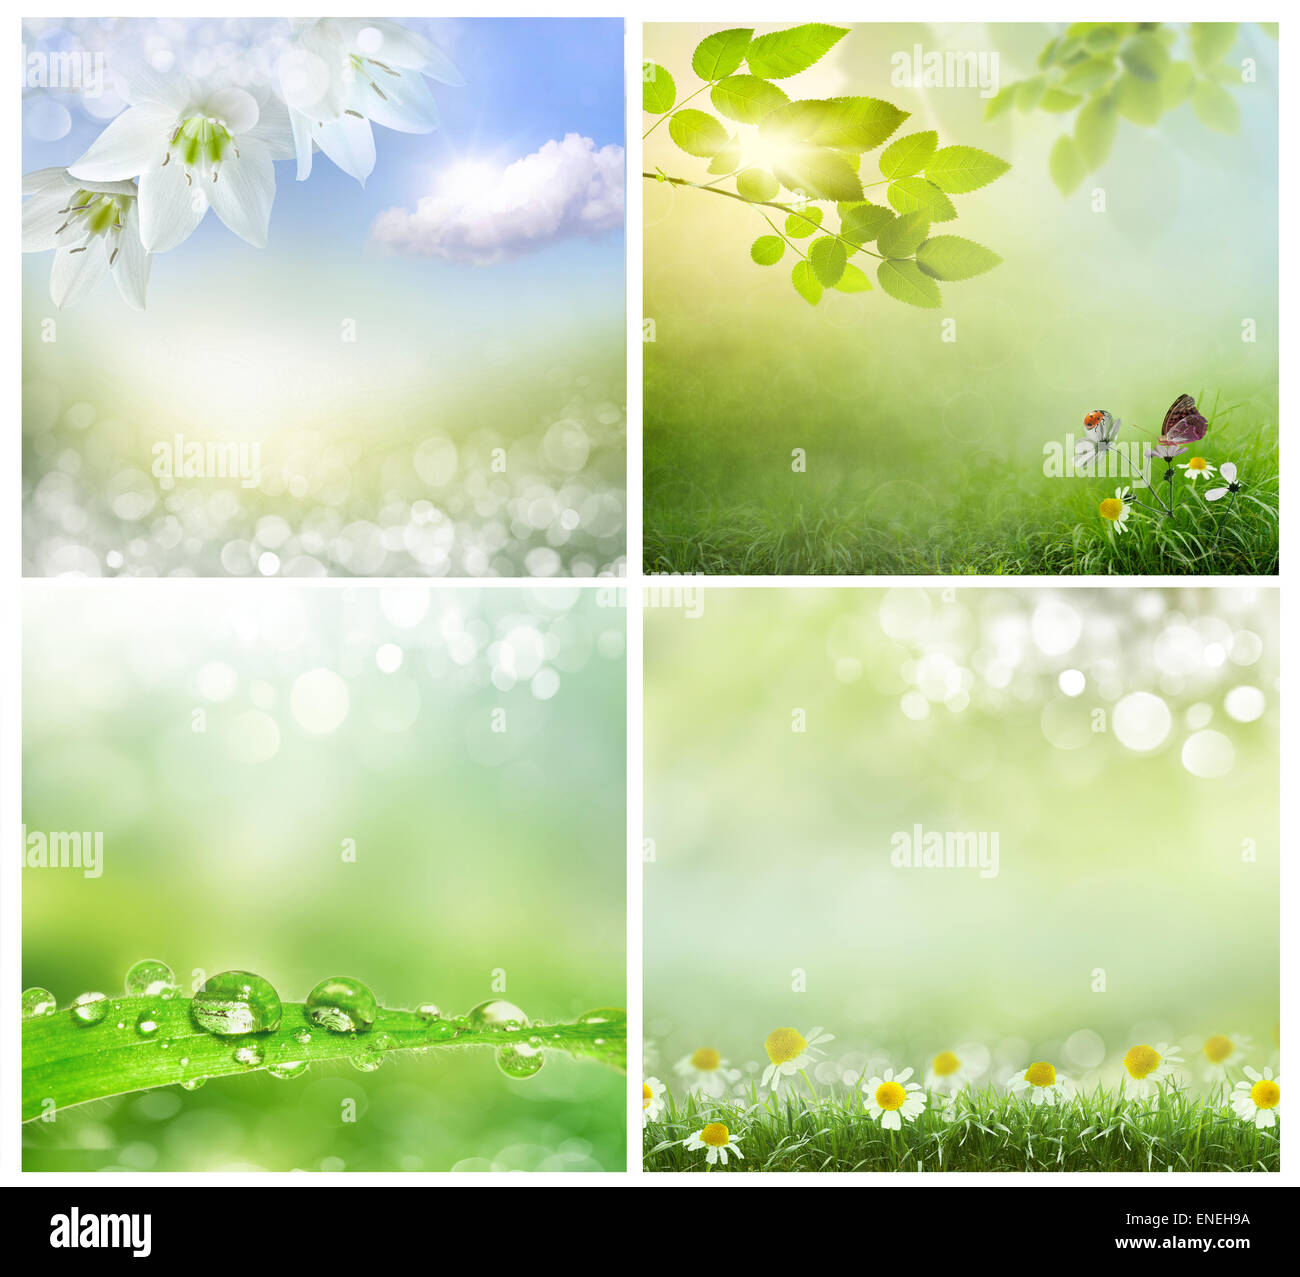 Fresh spring grass with flowers on a sunny day with natural blurred background Stock Photo